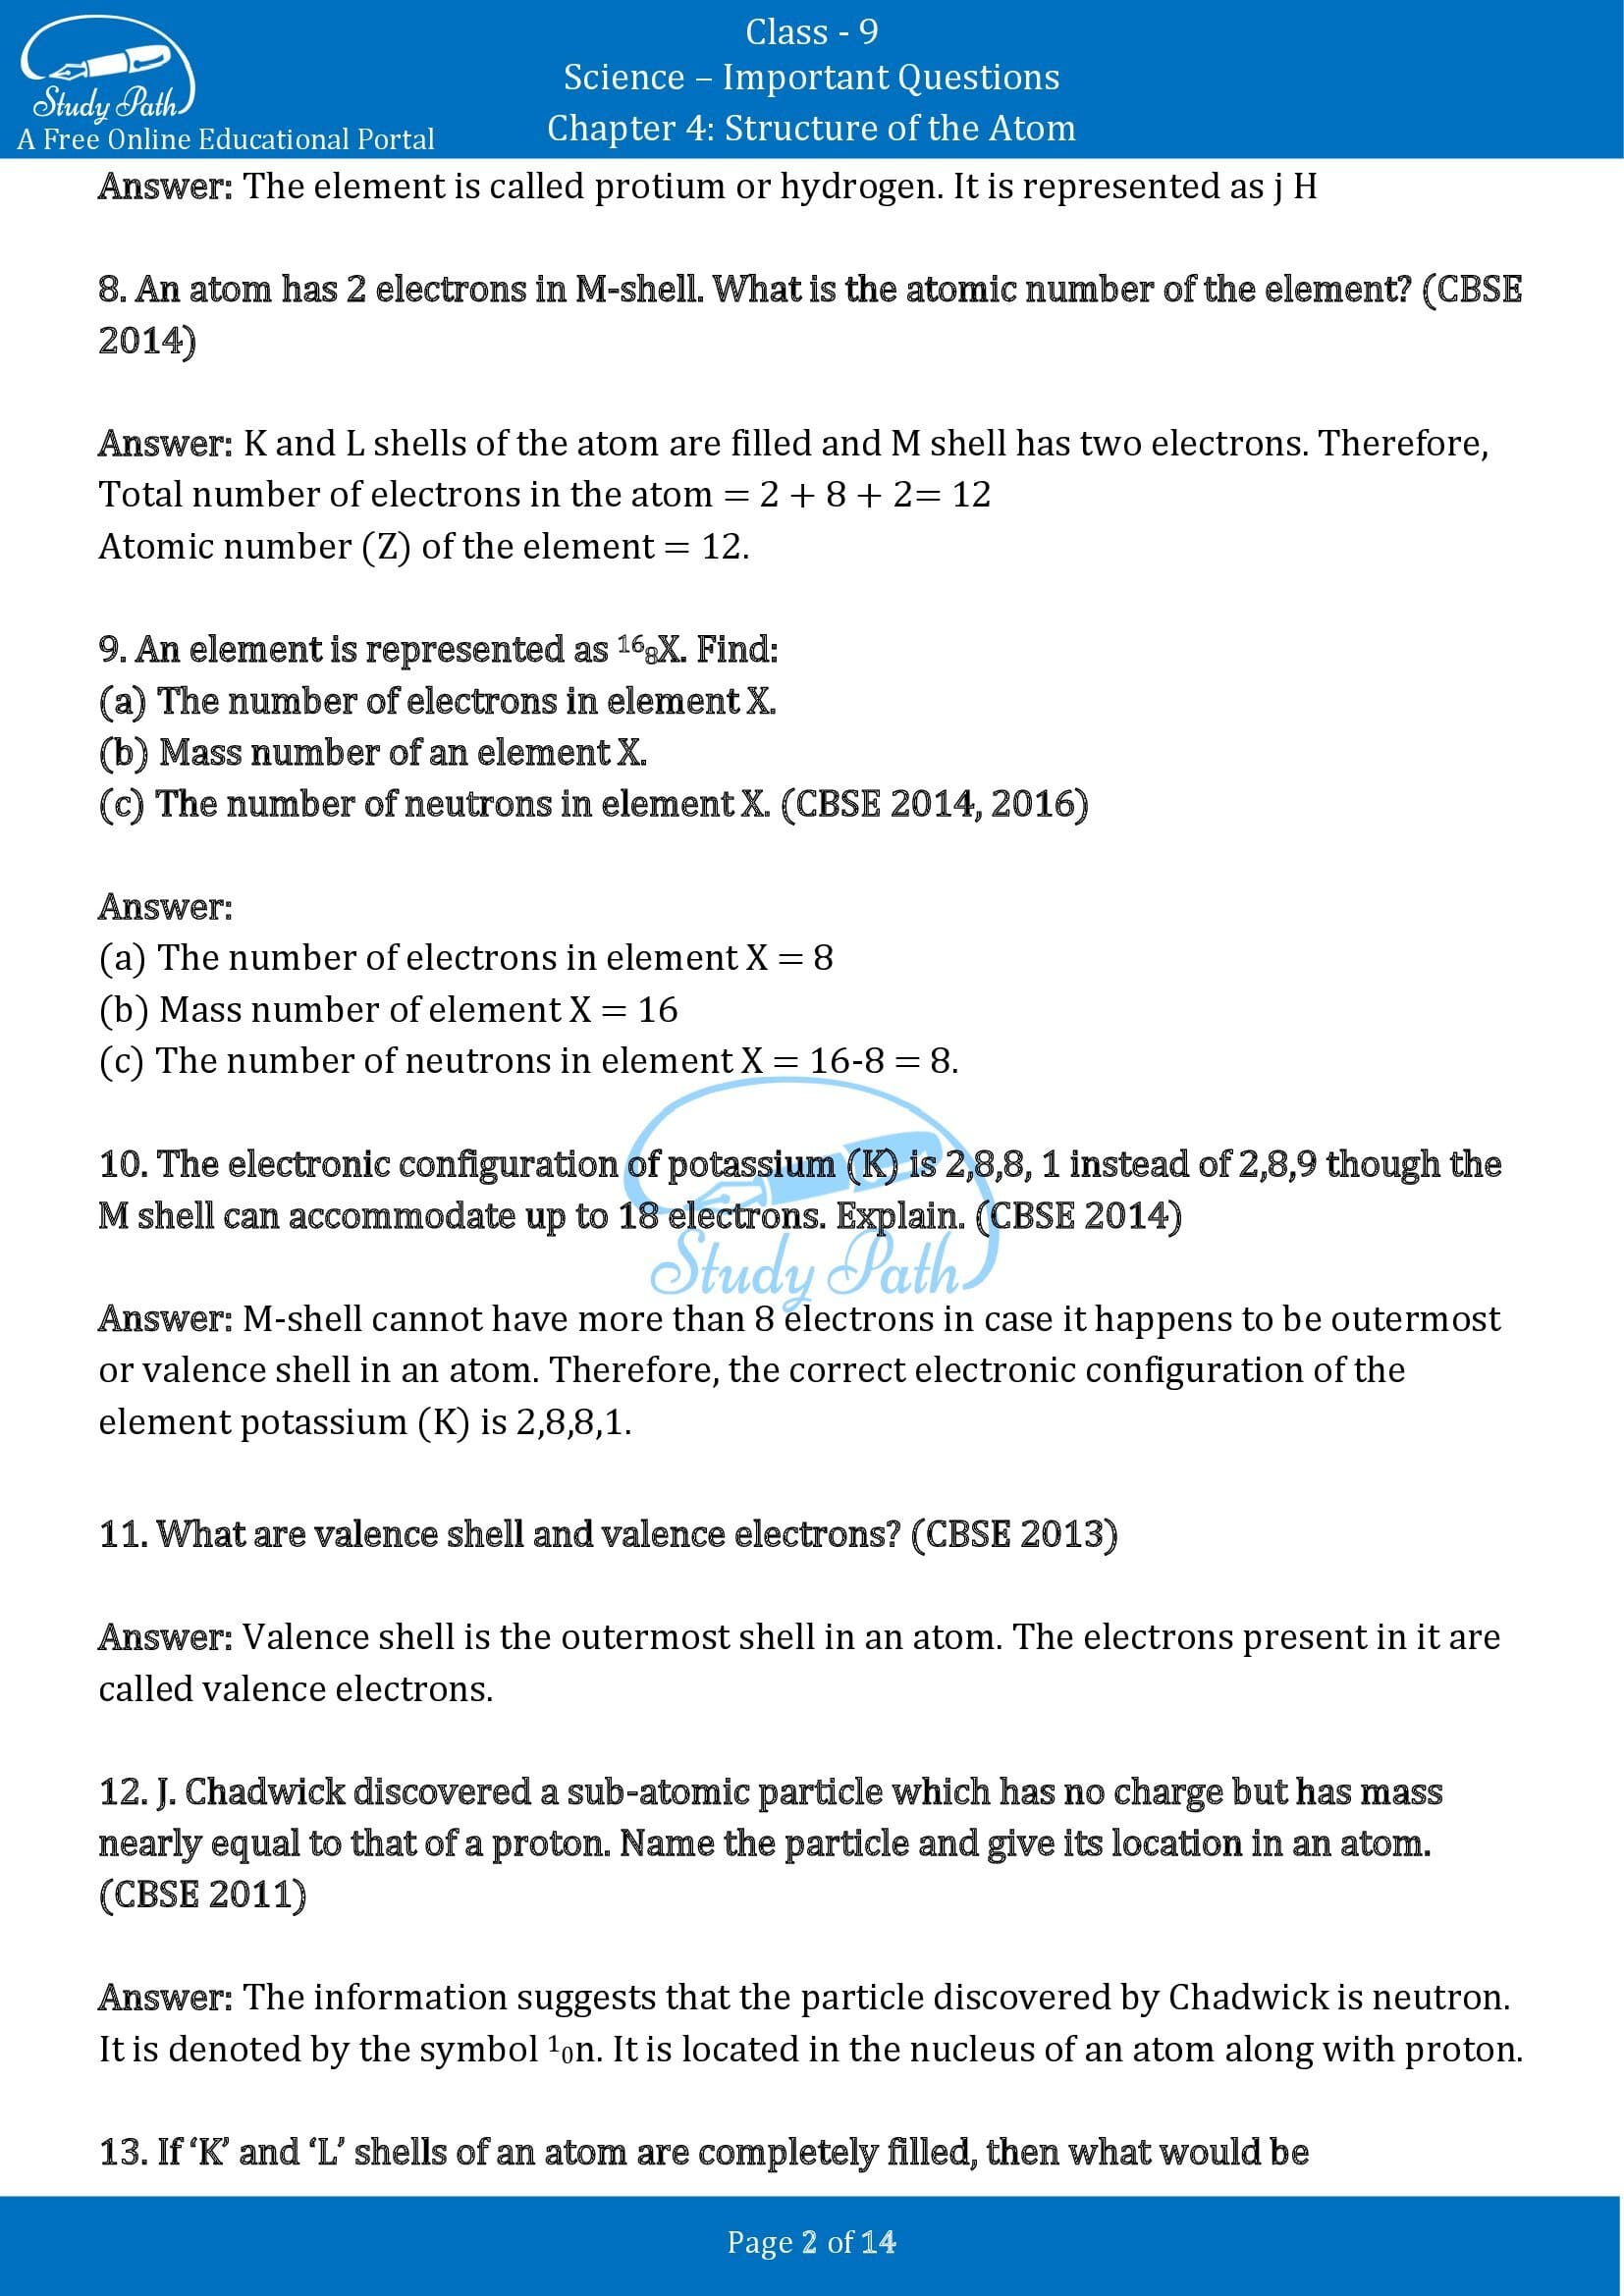 Important Questions for Class 9 Science Chapter 4 Structure of the Atom 00002